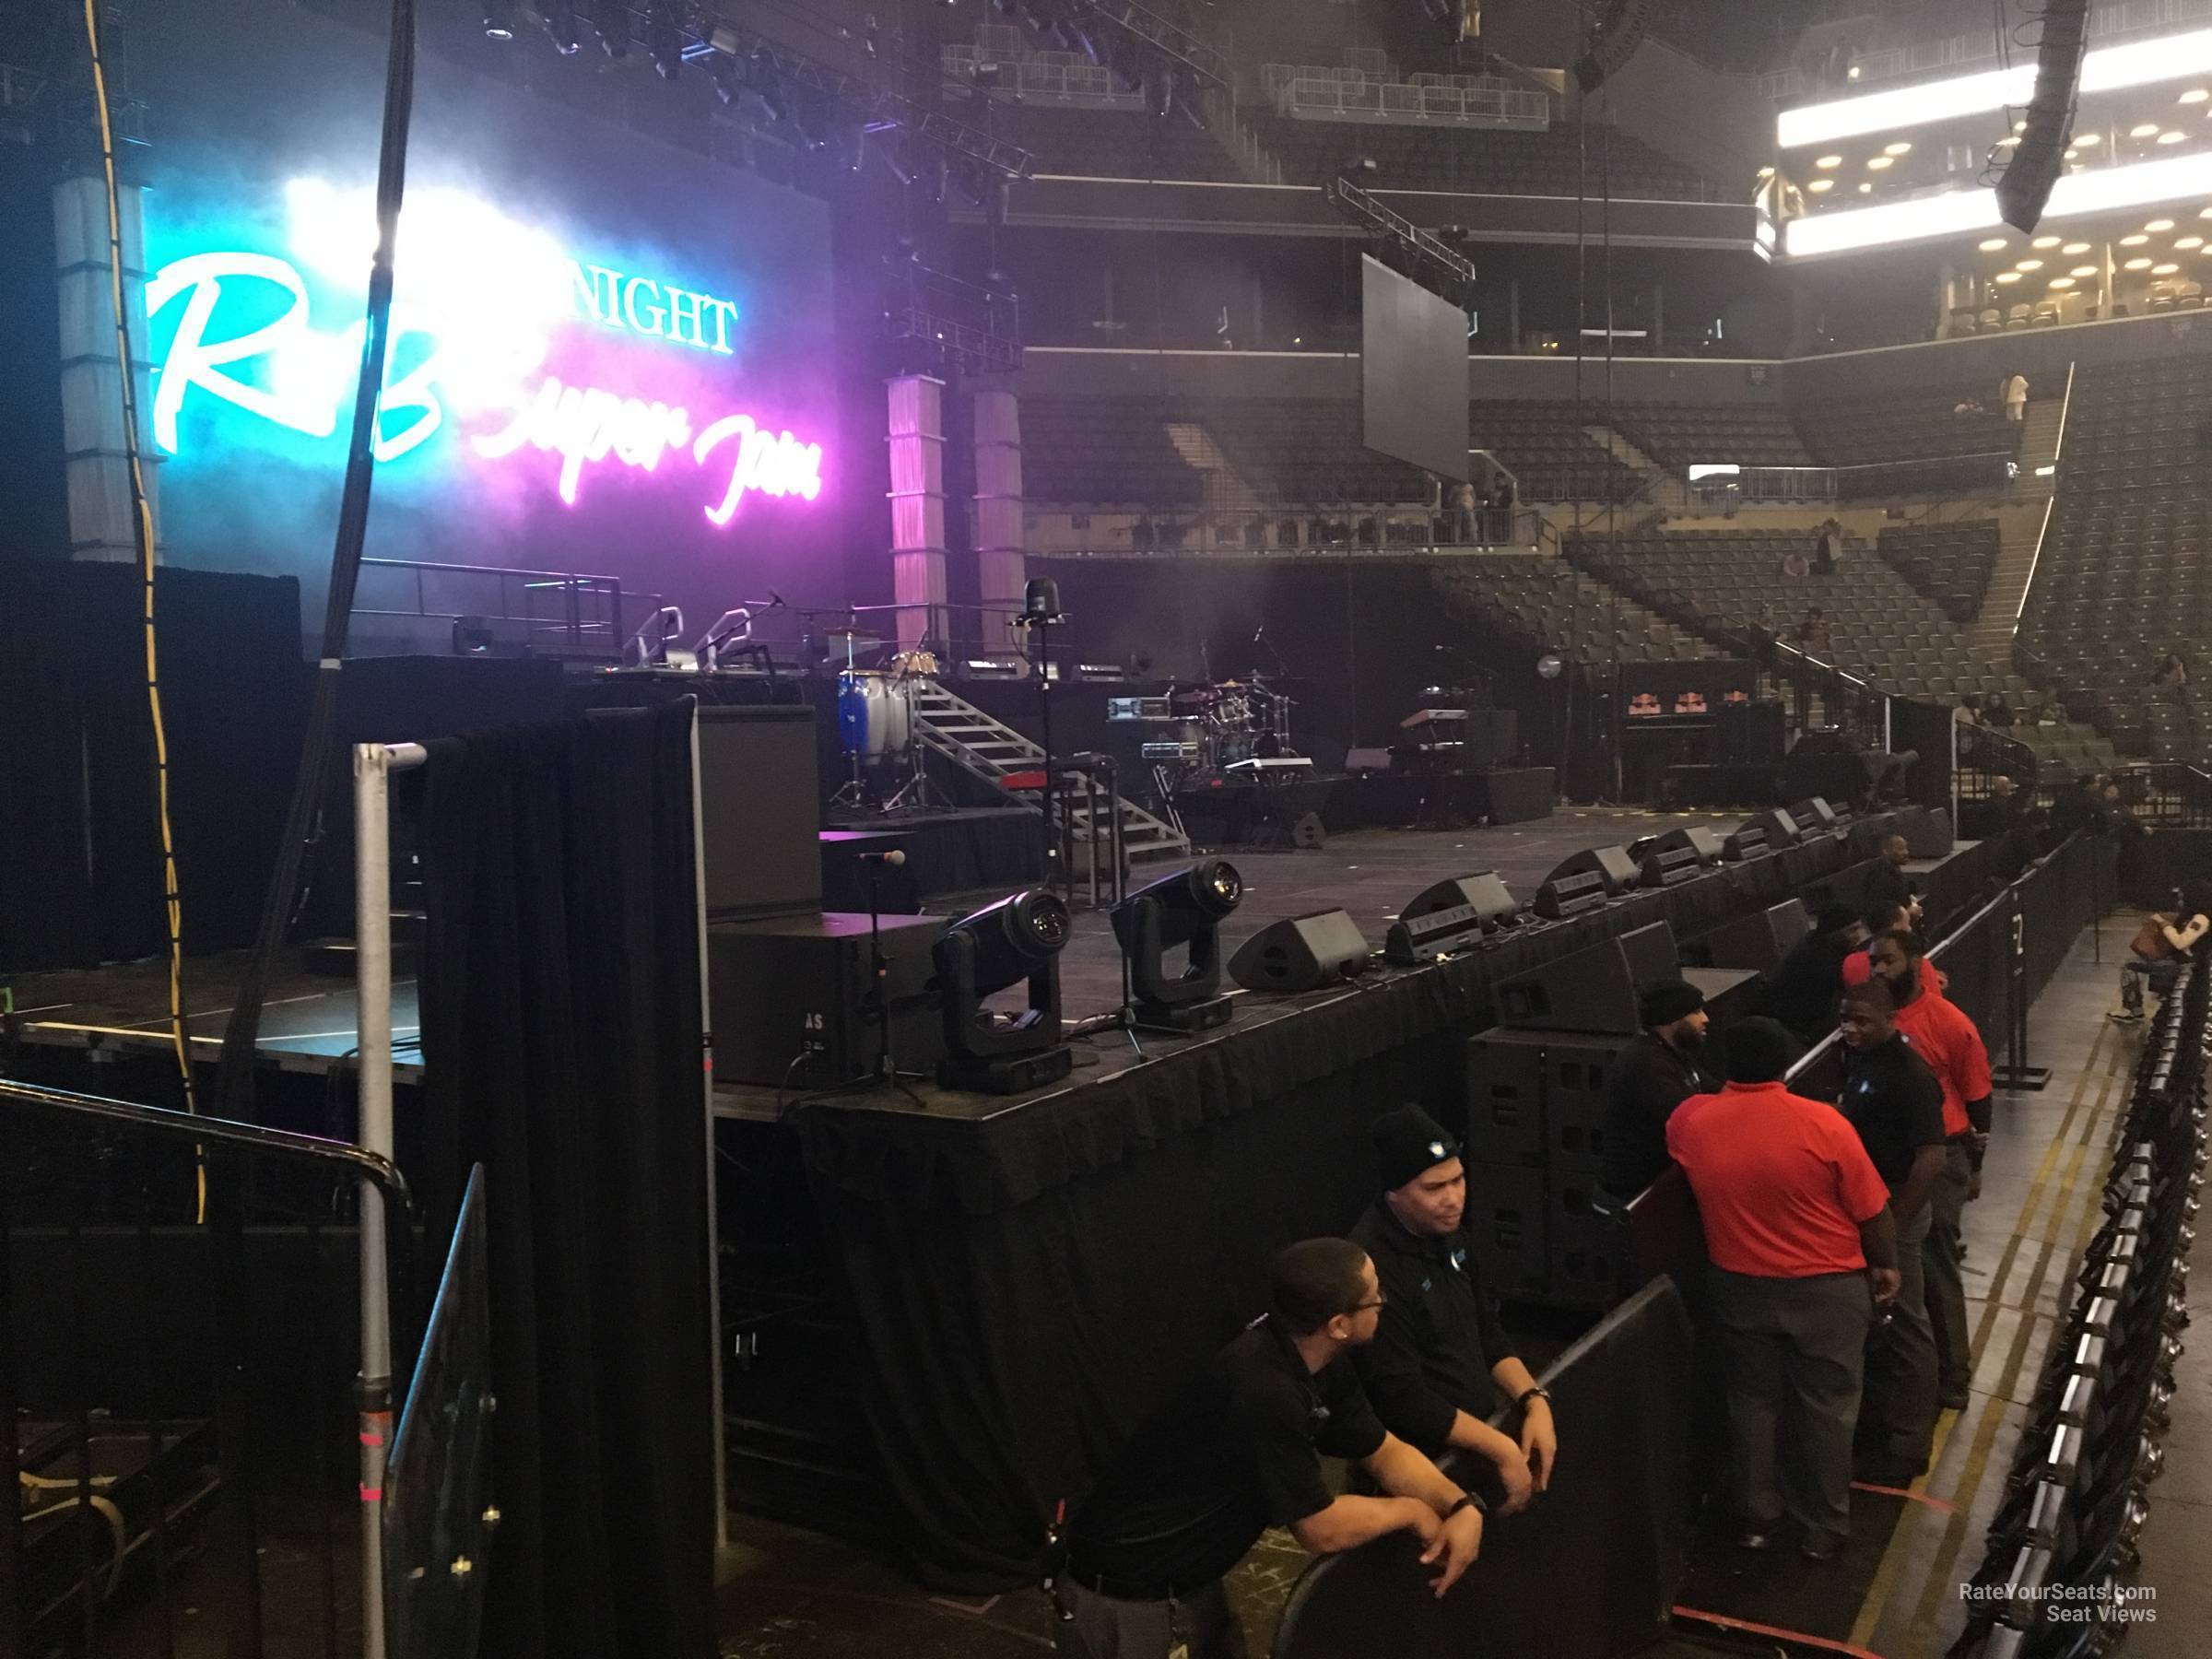 section 26, row 3 seat view  for concert - barclays center